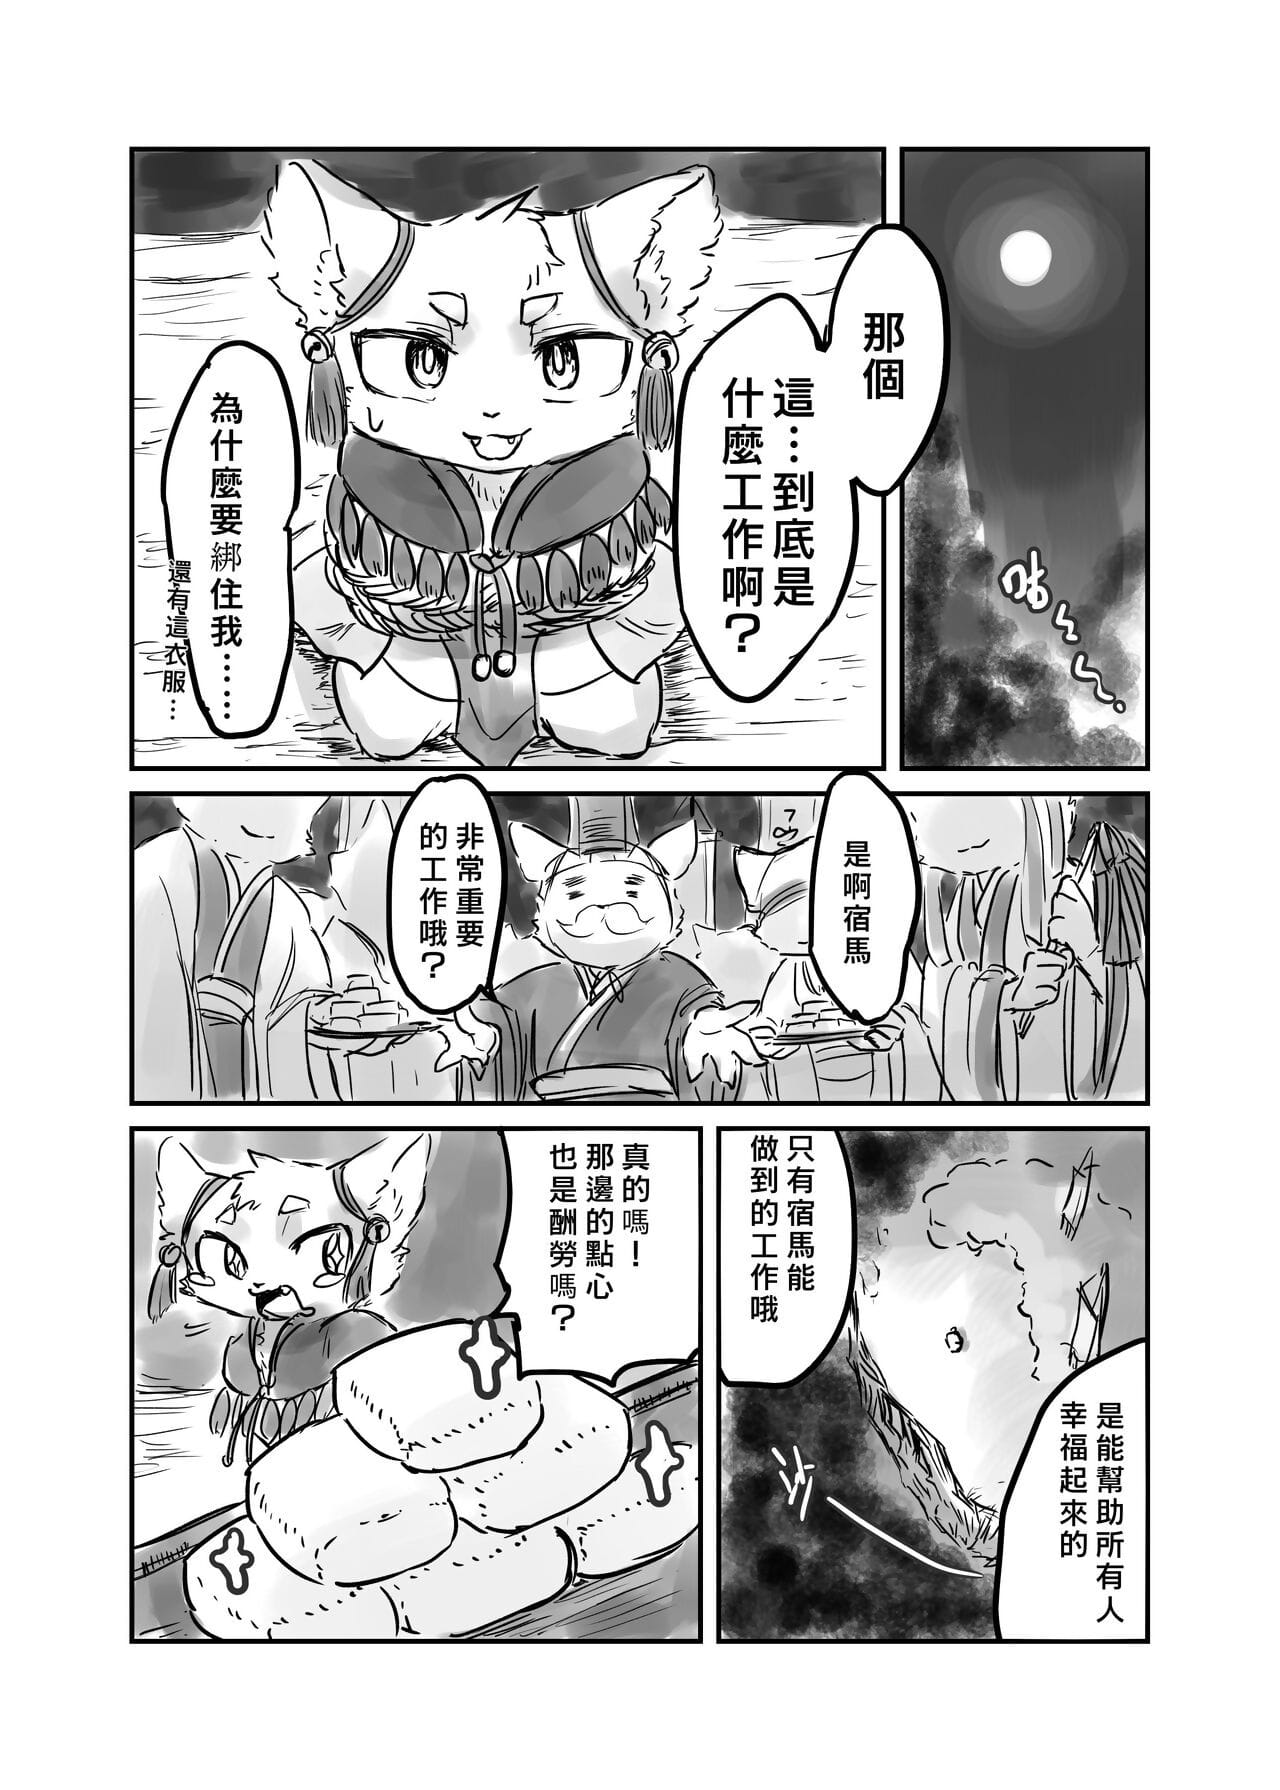 （the Besucher 他乡之人 by：鬼流 Teil 3 page 1